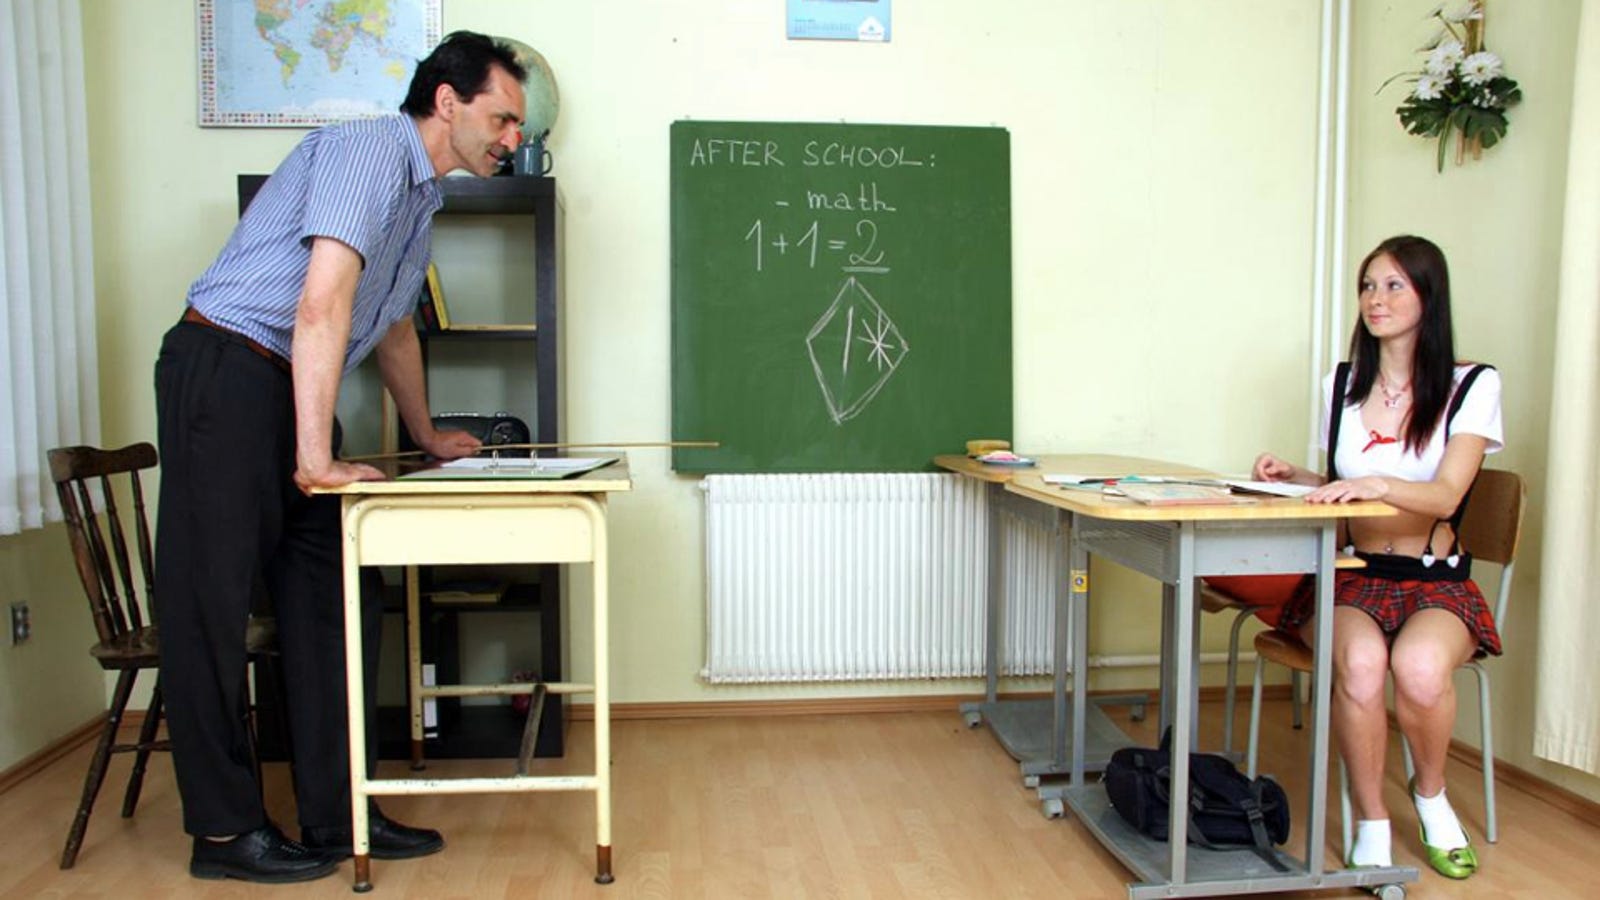 School Class - The blackboards in classroom porn â€” just how accurate are ...